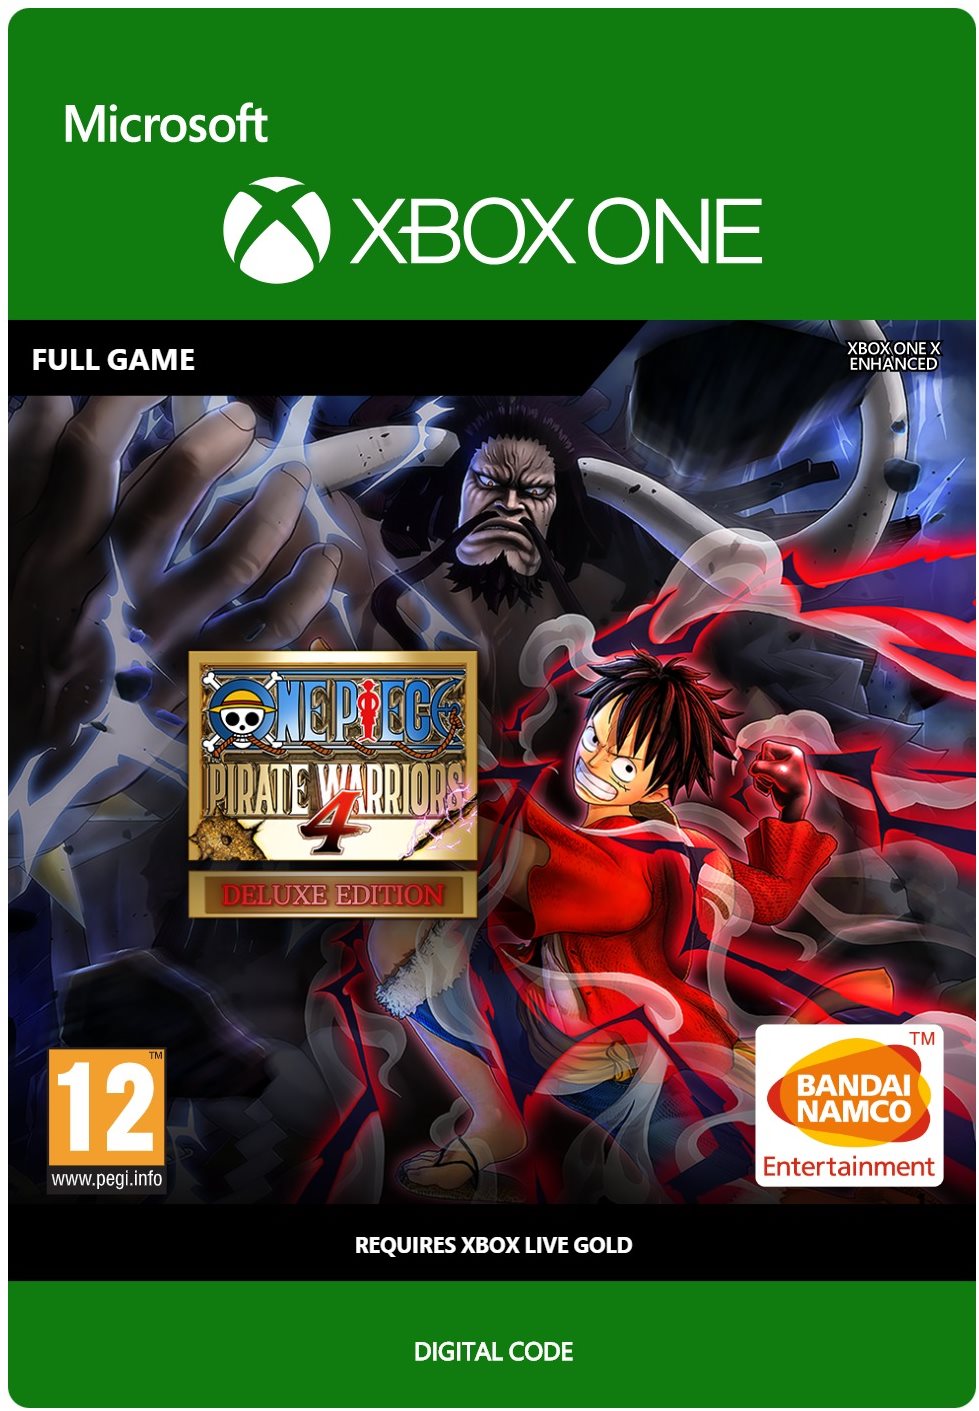 ONE PIECE: PIRATE WARRIORS 4 Deluxe Edition - Xbox DIGITAL